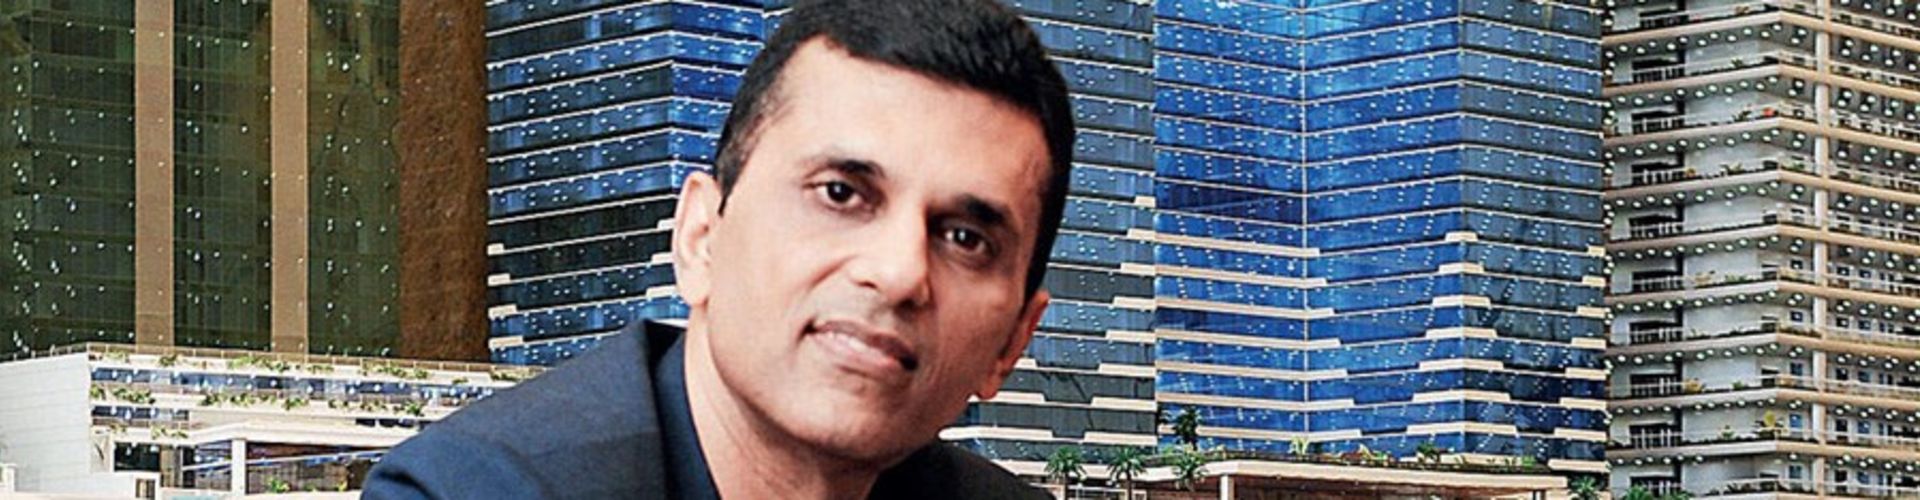 Pan India Release Is Beneficial For Business Says Anand Pandit